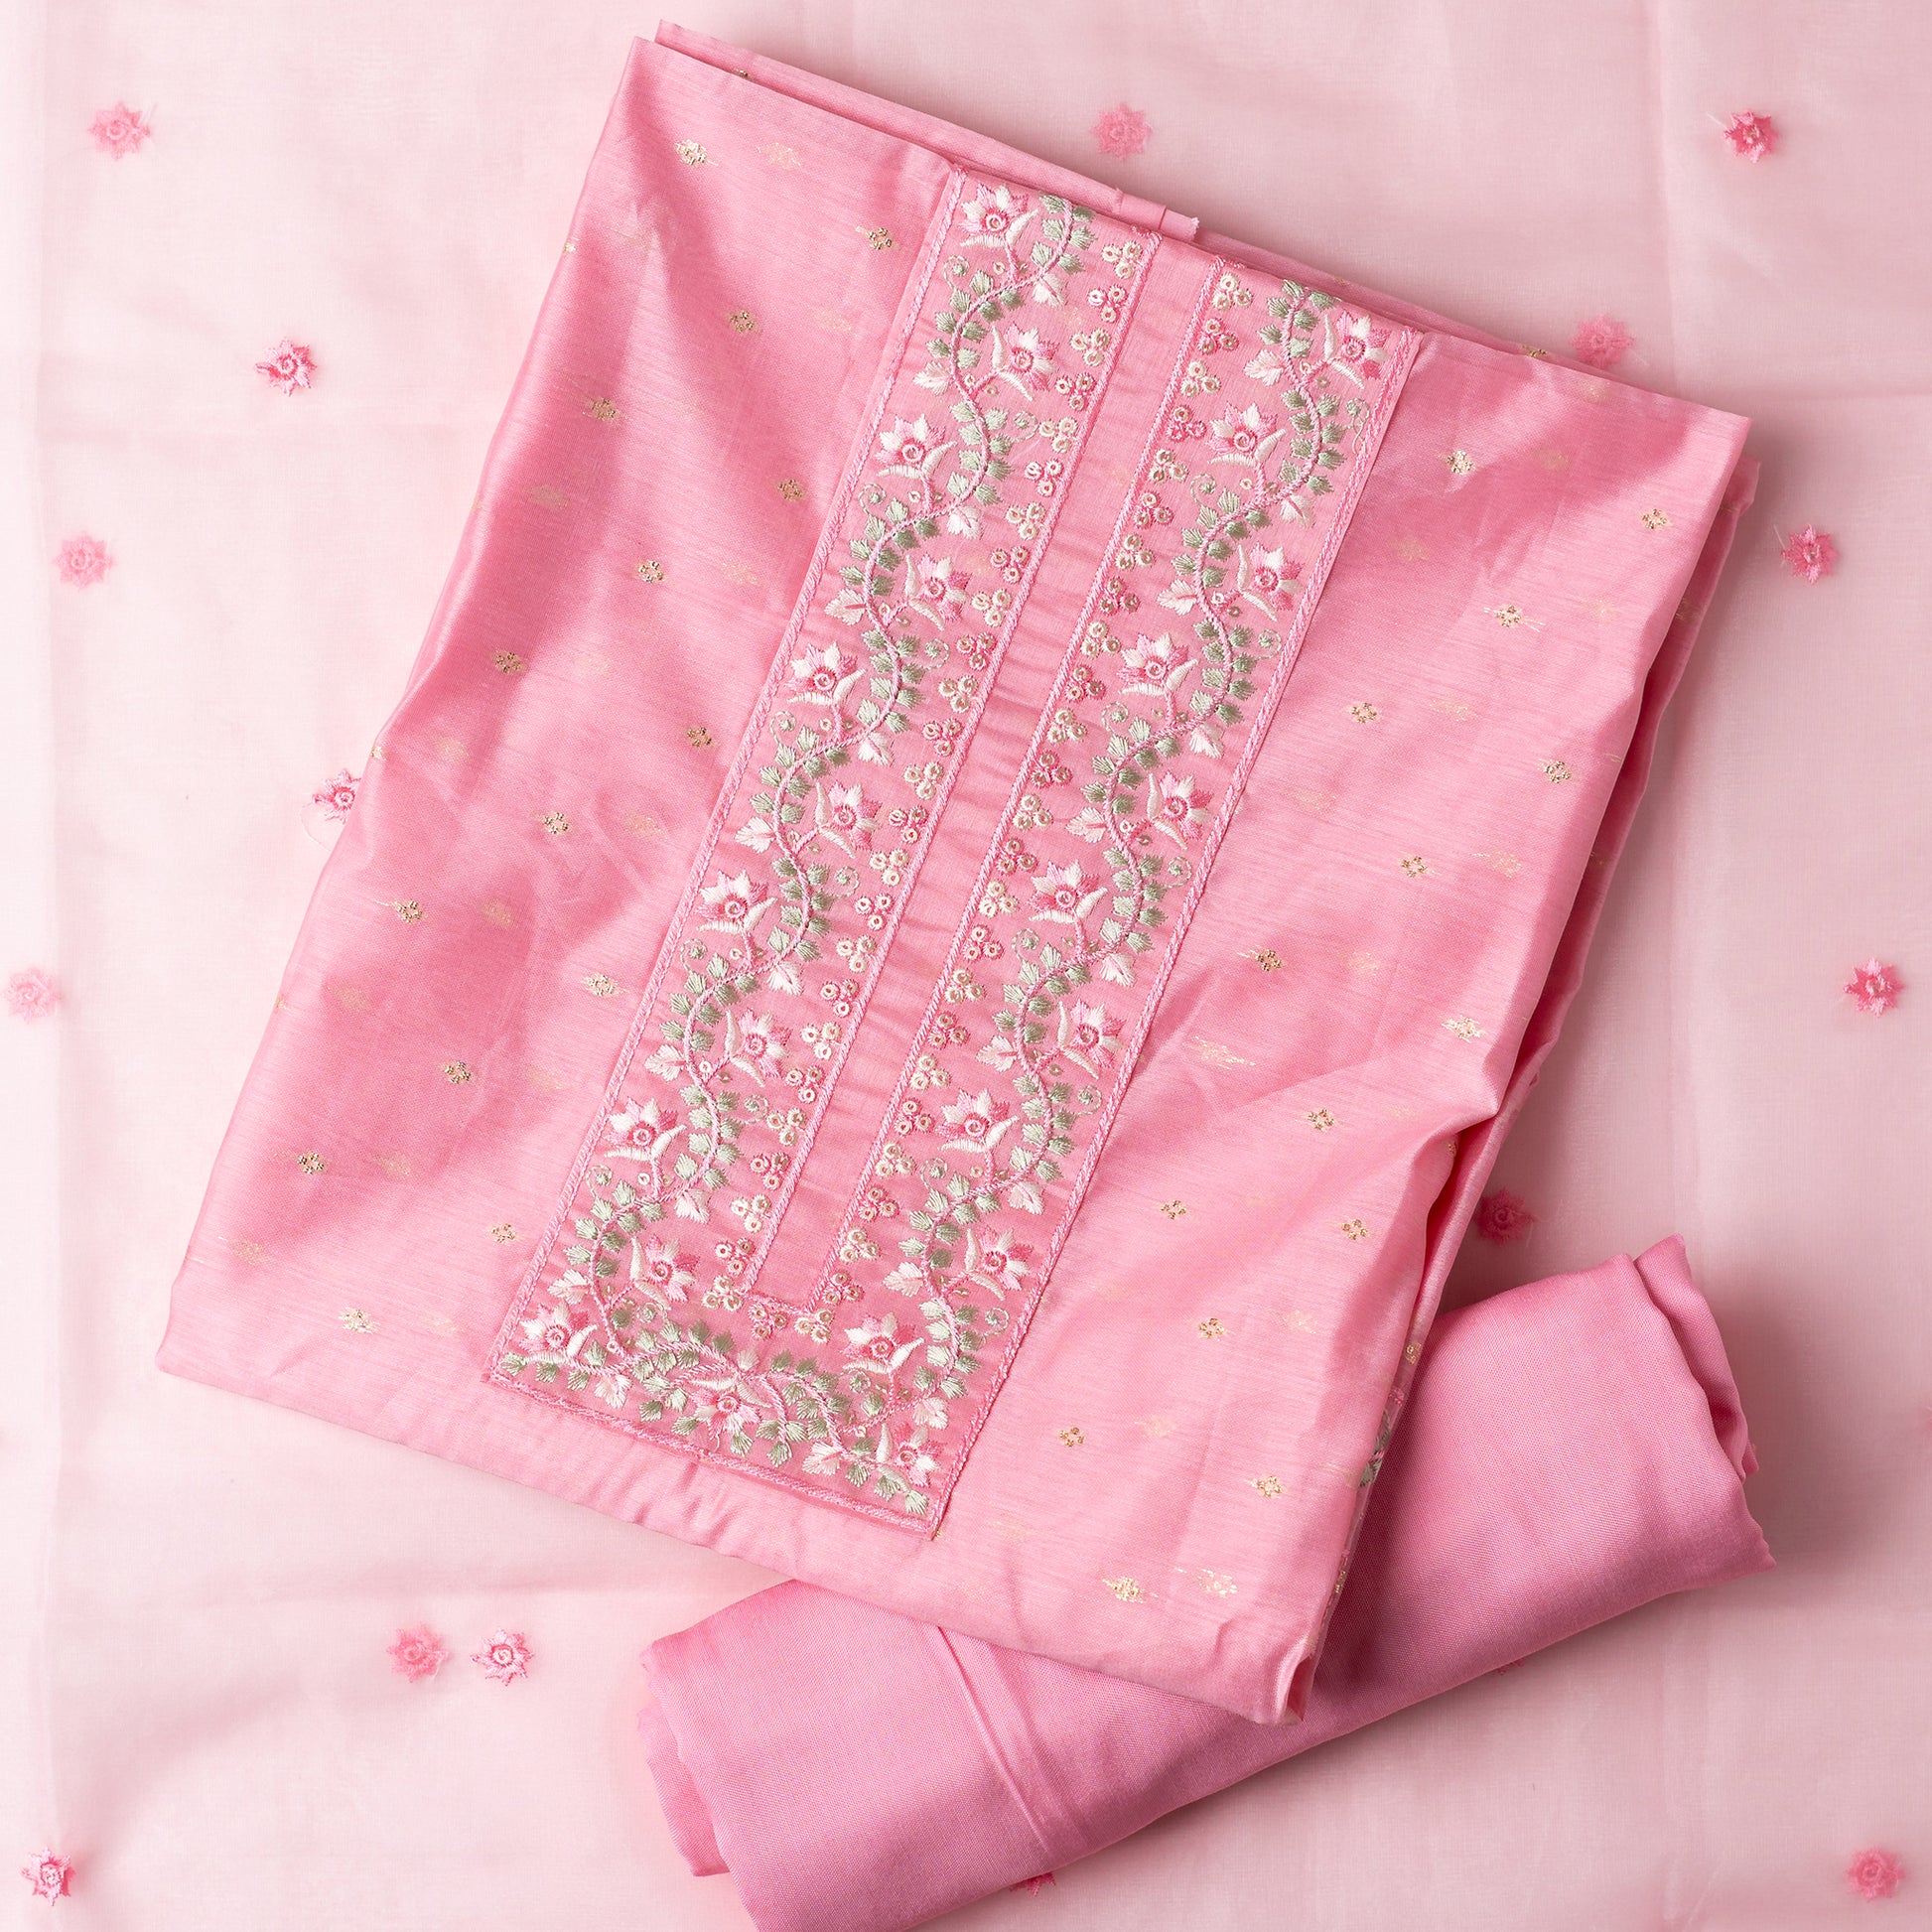 This is one of the best gift for your mom, a beautiful light pink color chanderi silk top with nicely crafted embroidery work in neck line, golden color jacquard weaving all over the body, embroidery work on the border of the dress matching the neck line, it has also golden color sequins work in the border. Beautiful silk dupatta with floral embroidery and the borders are perfectly in sync with the top border, embroidery work and sequins. Plain light pink color soft cotton silk bottom.